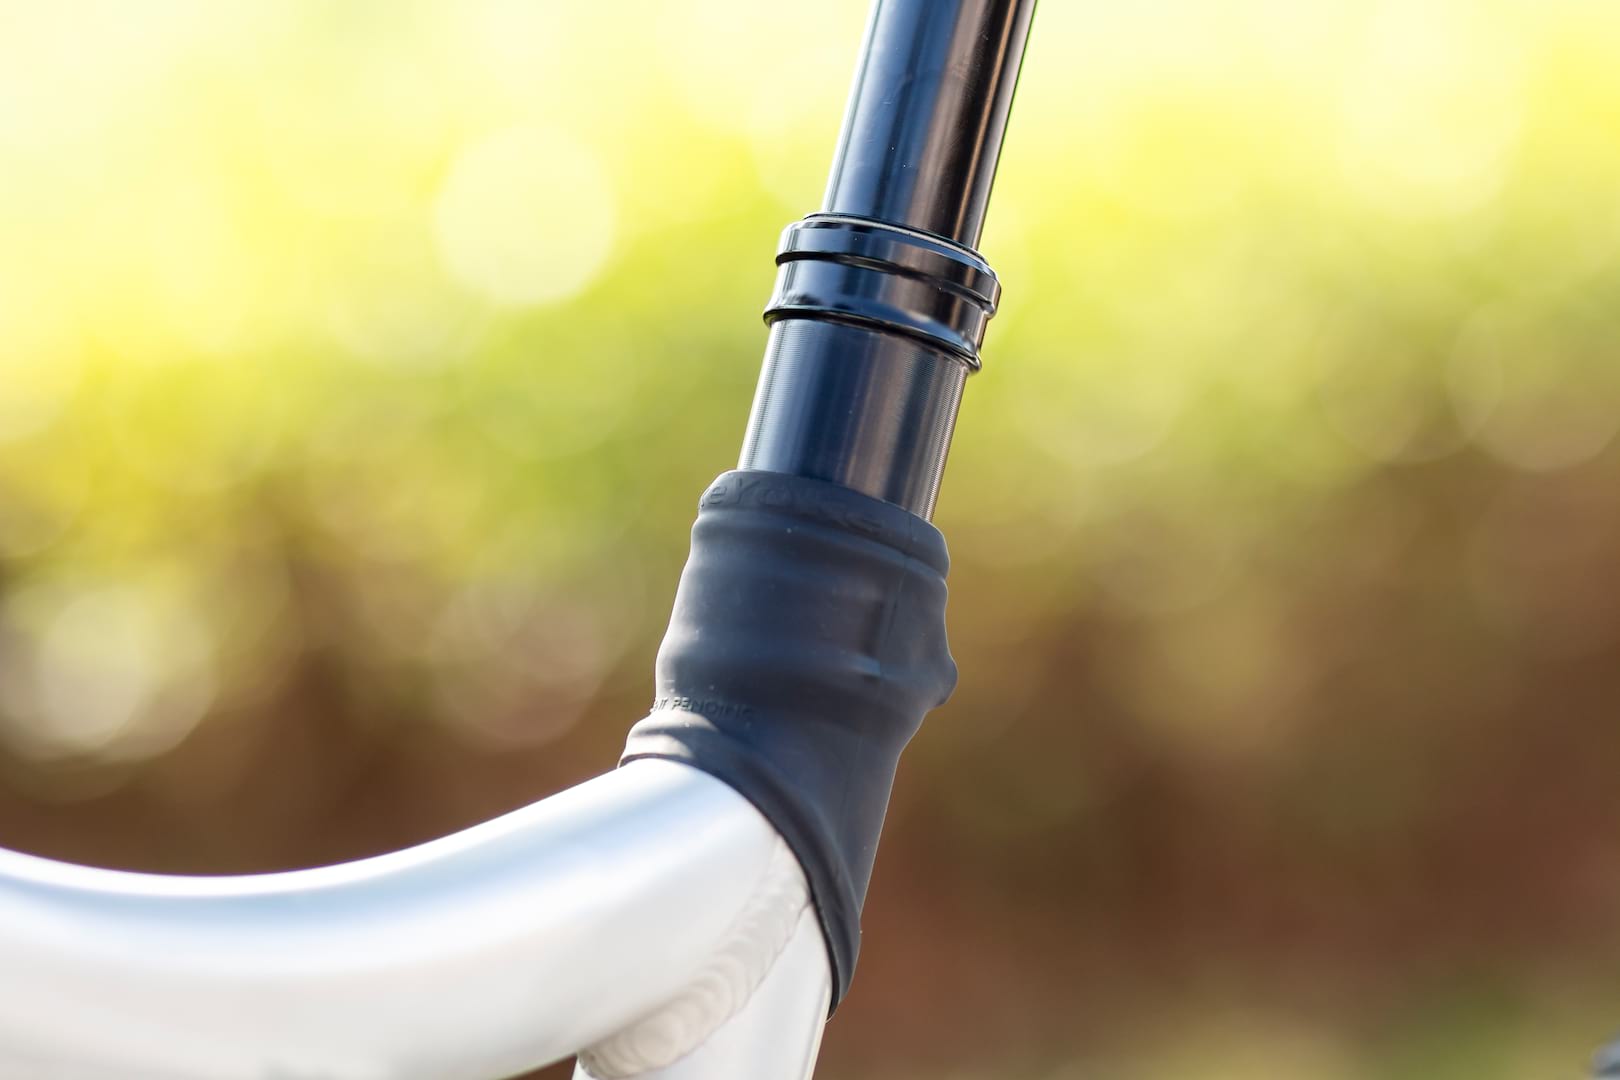 Bikeyoke Wants You To Whack A Willy On Your Bike In 2019